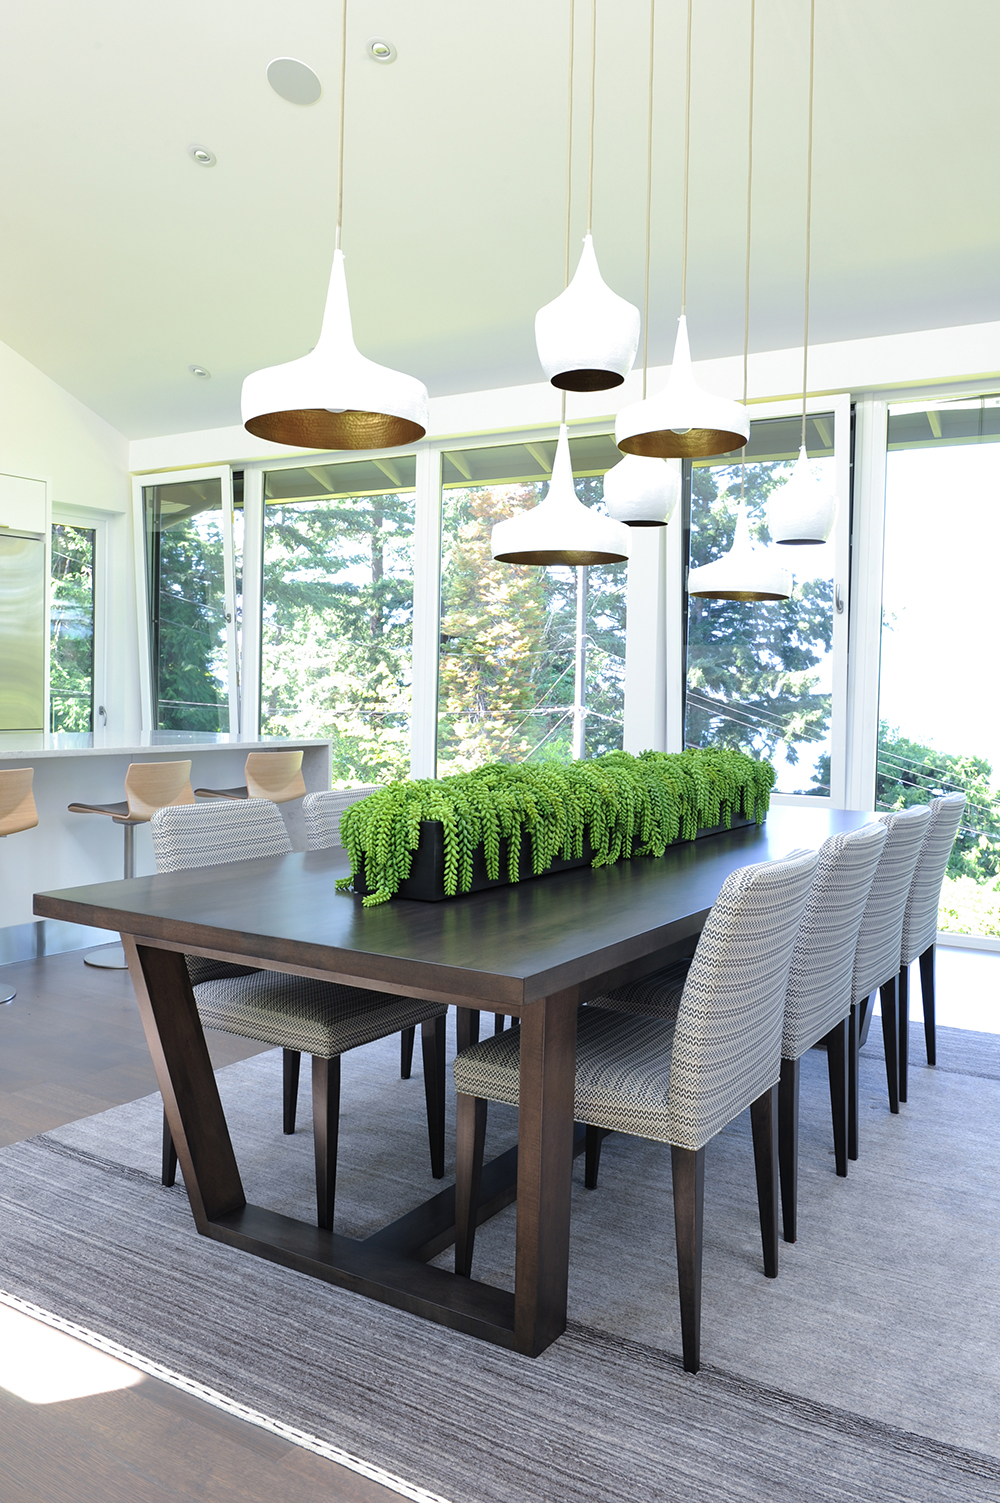 Nature-inspired dining area with gorgeous pendant lights.